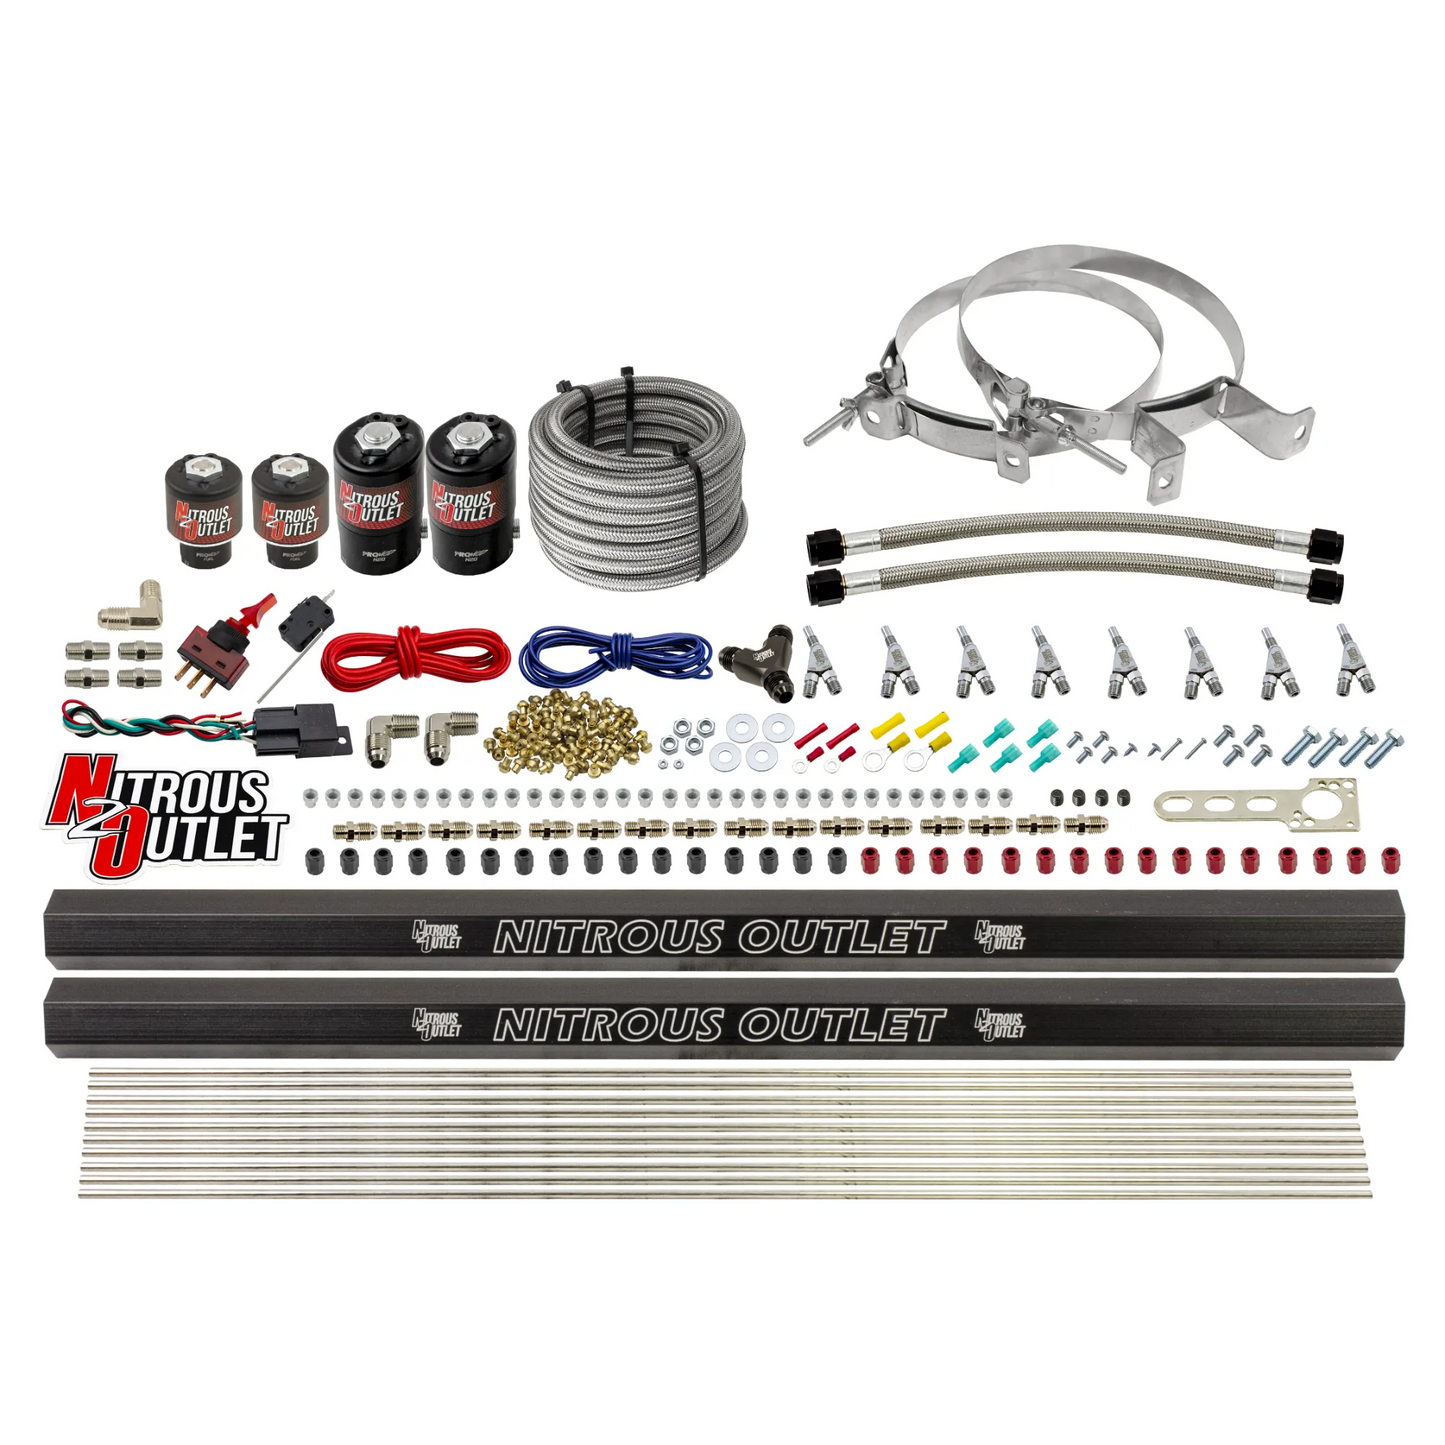 8 Cylinder Single Stage Direct Port Nitrous System with Injection Rails - Alcohol - .122 Nitrous/.177 Fuel - Straight Blow Through Nozzles